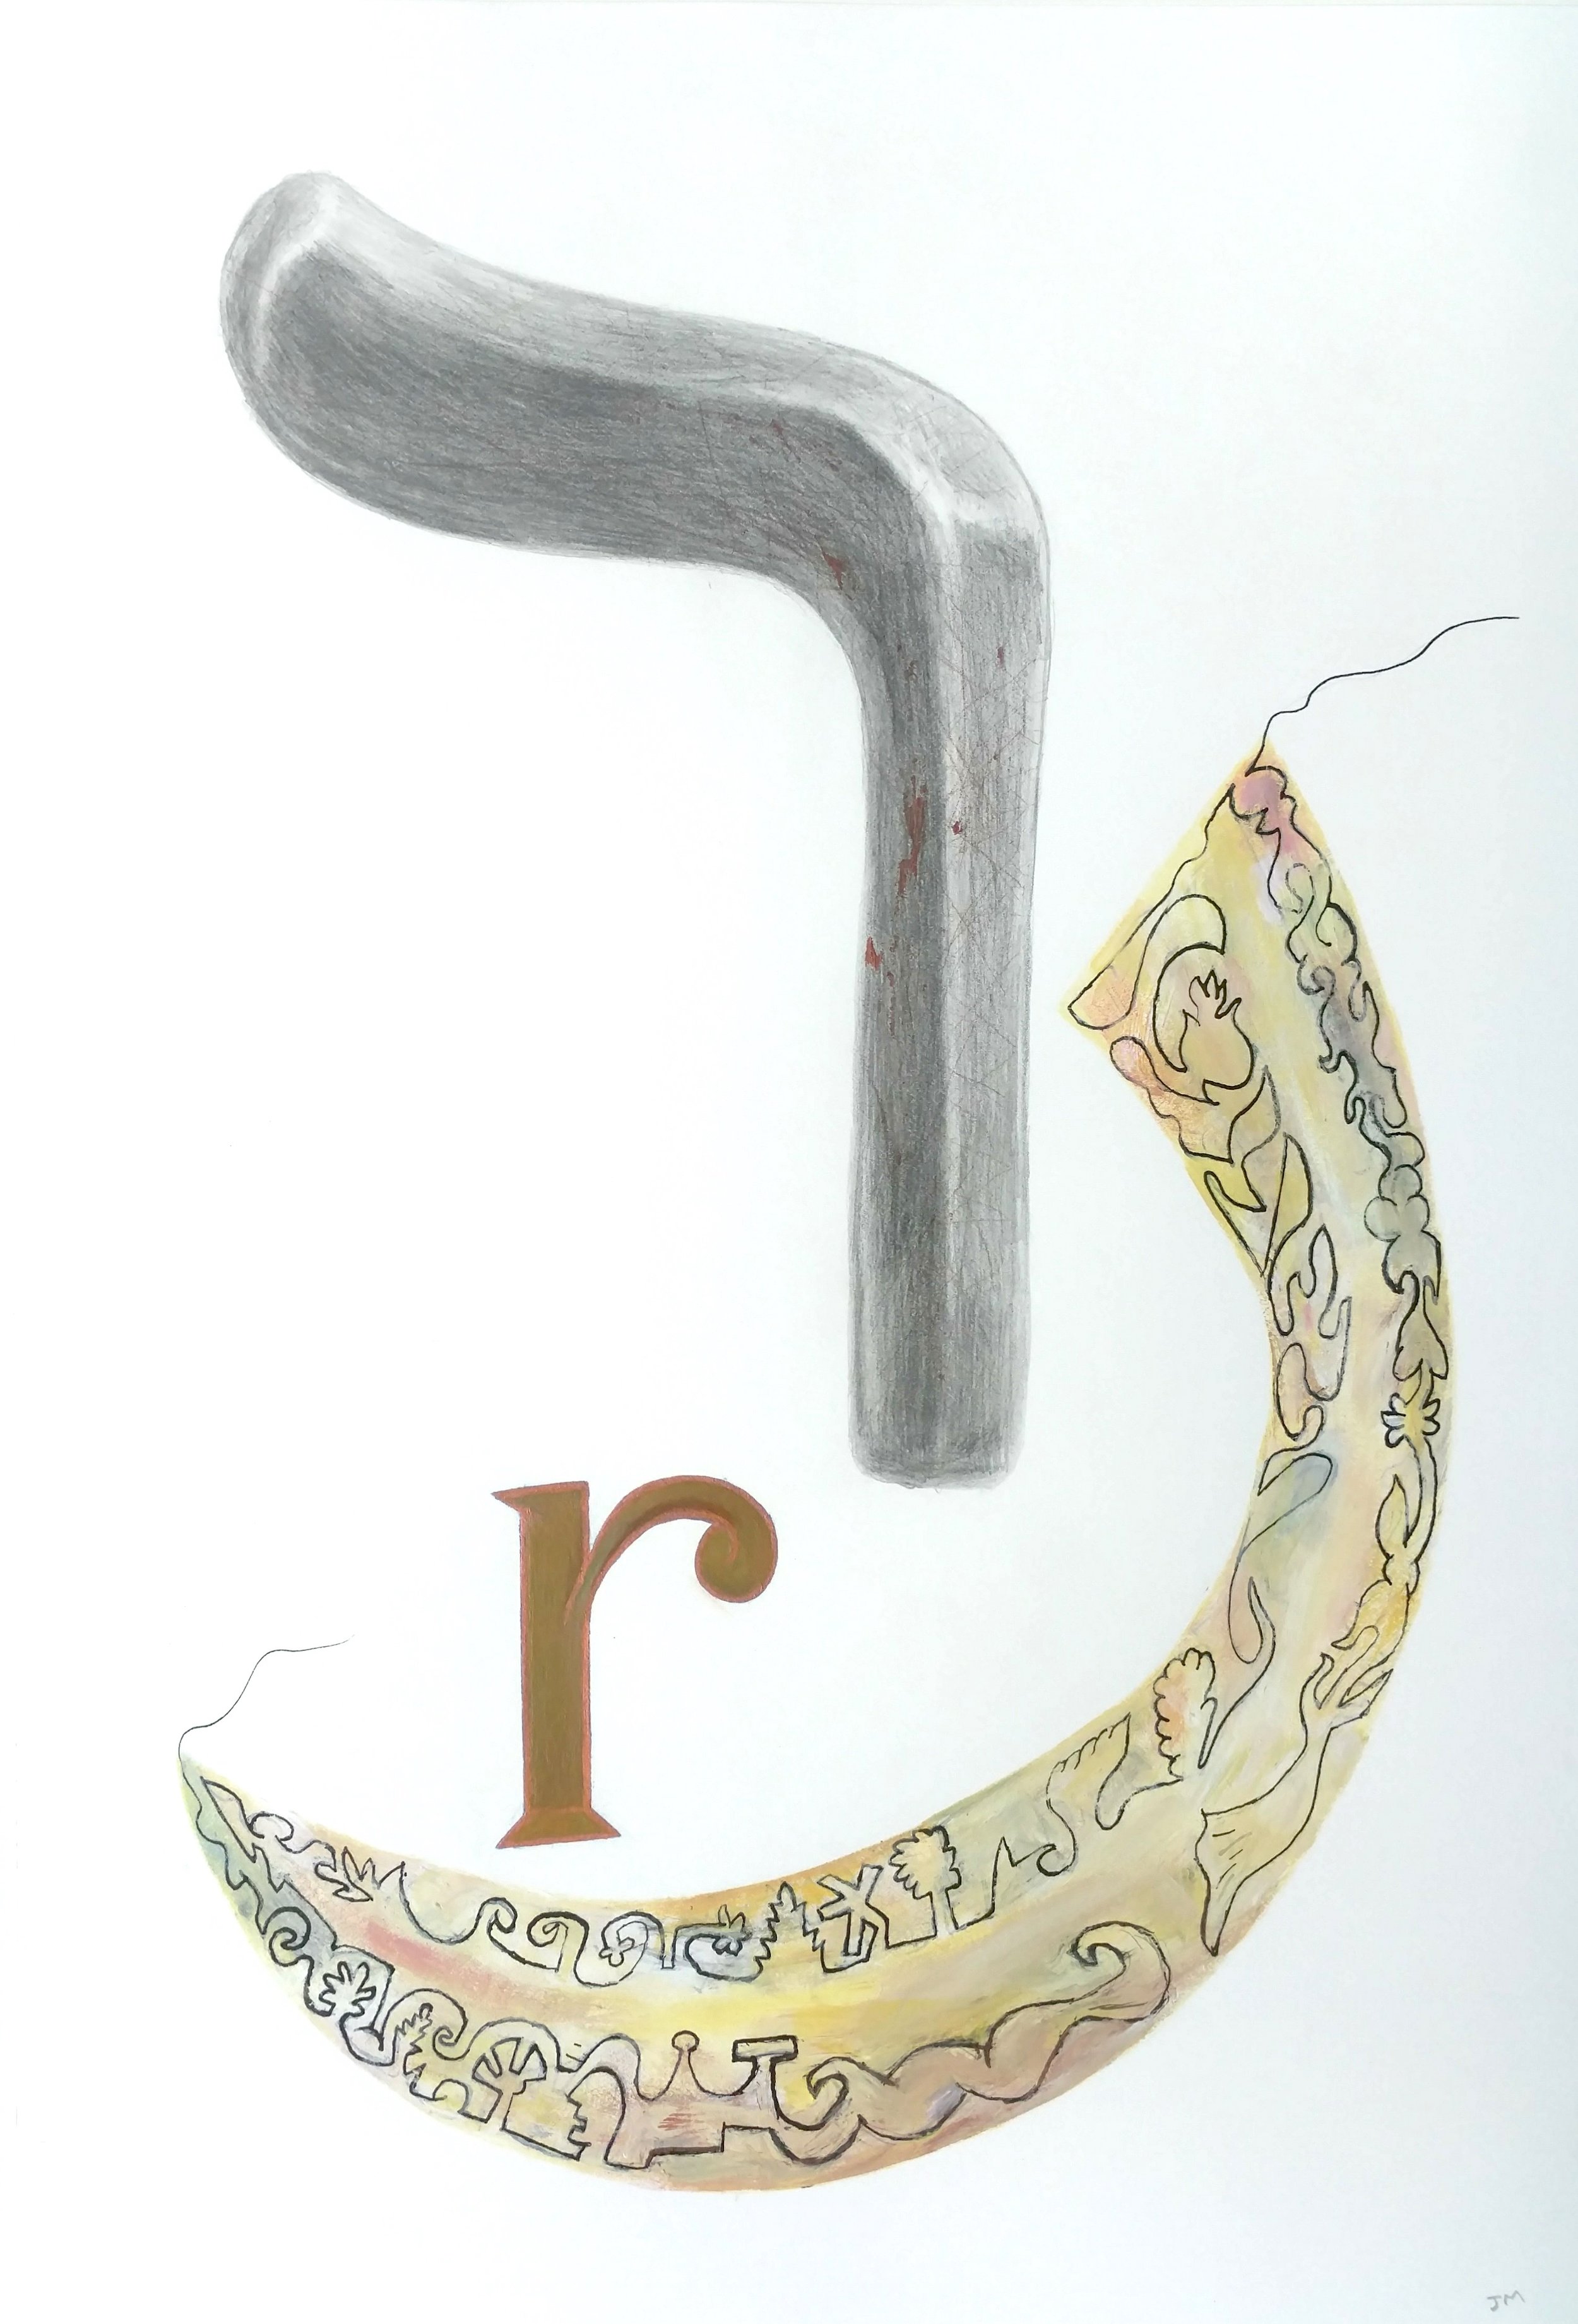  Joel Moskowitz,  Arabic  Raa and  Hebrew  Resh , with R,  Mixed media on paper, 22x15 